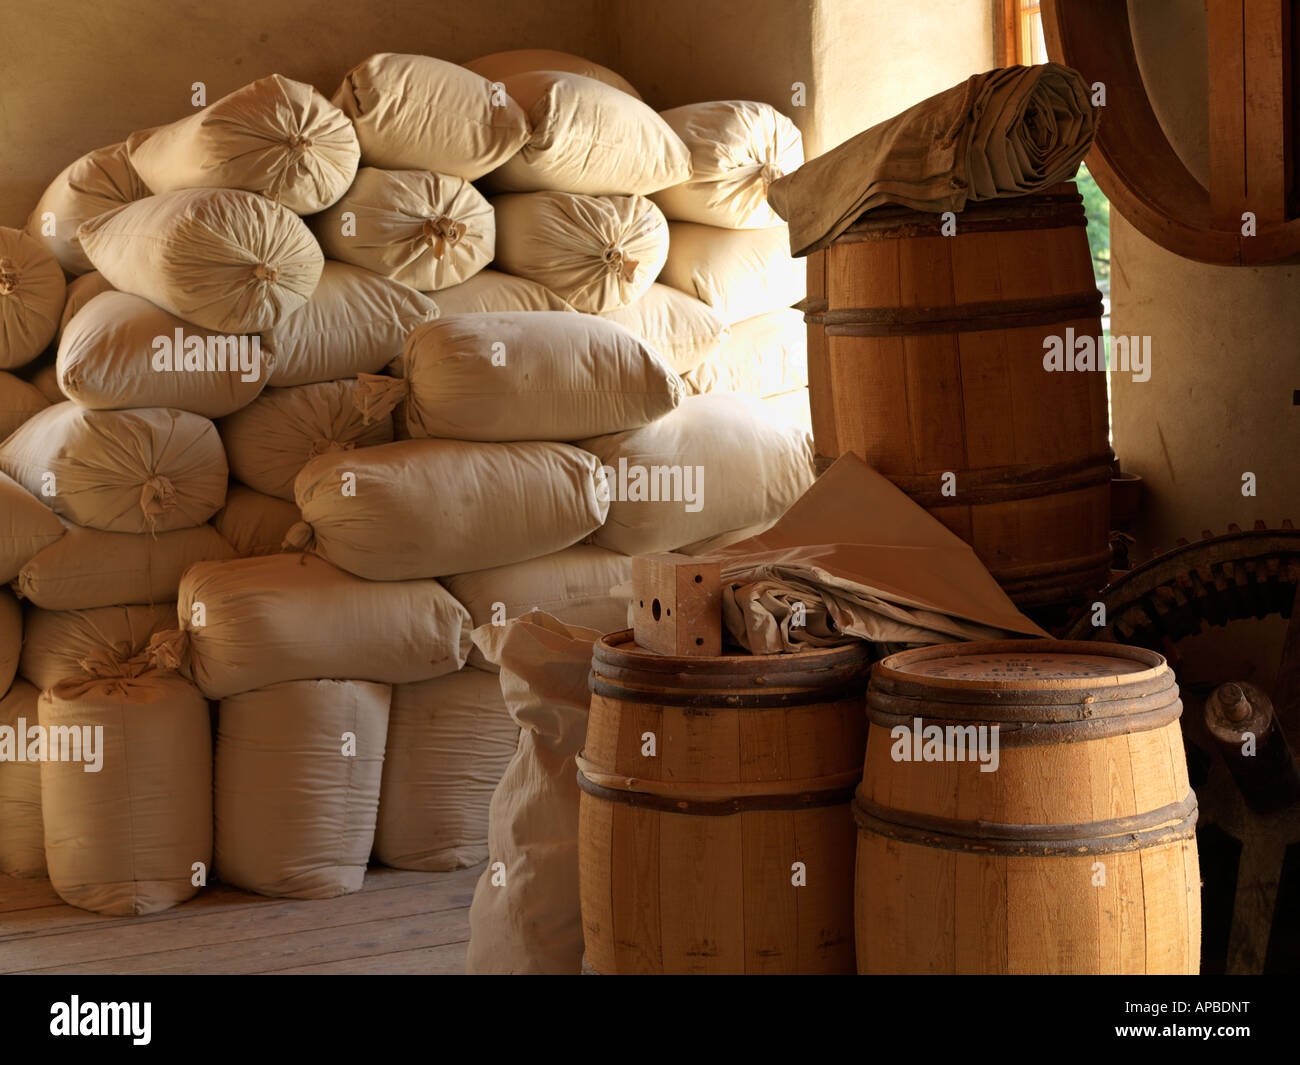 Canada Ontario Morrisburg Upper Canada Village stacked bags of flour at the Bellamy s Steam Flour Mill Stock Photo